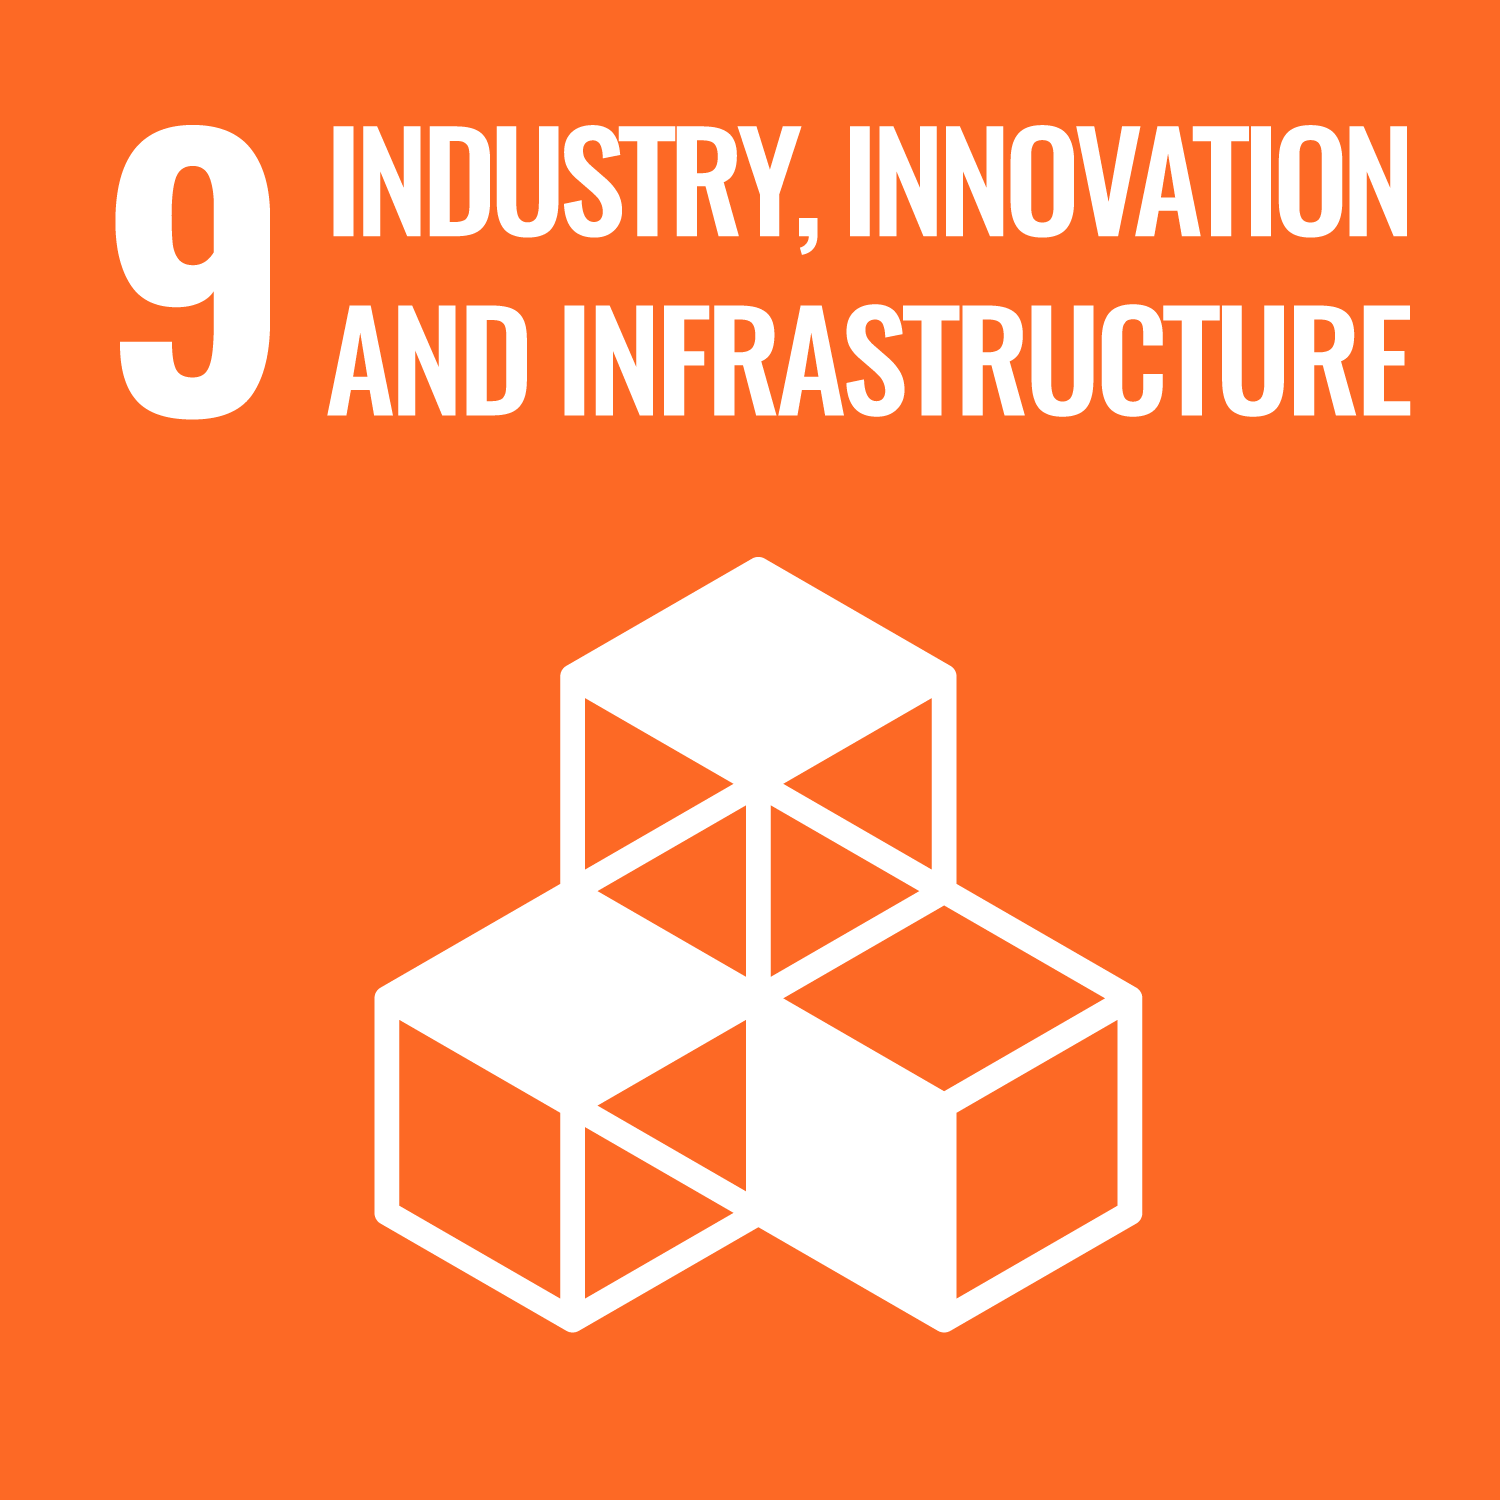 UNSG - Industry, innovation, infrastructure